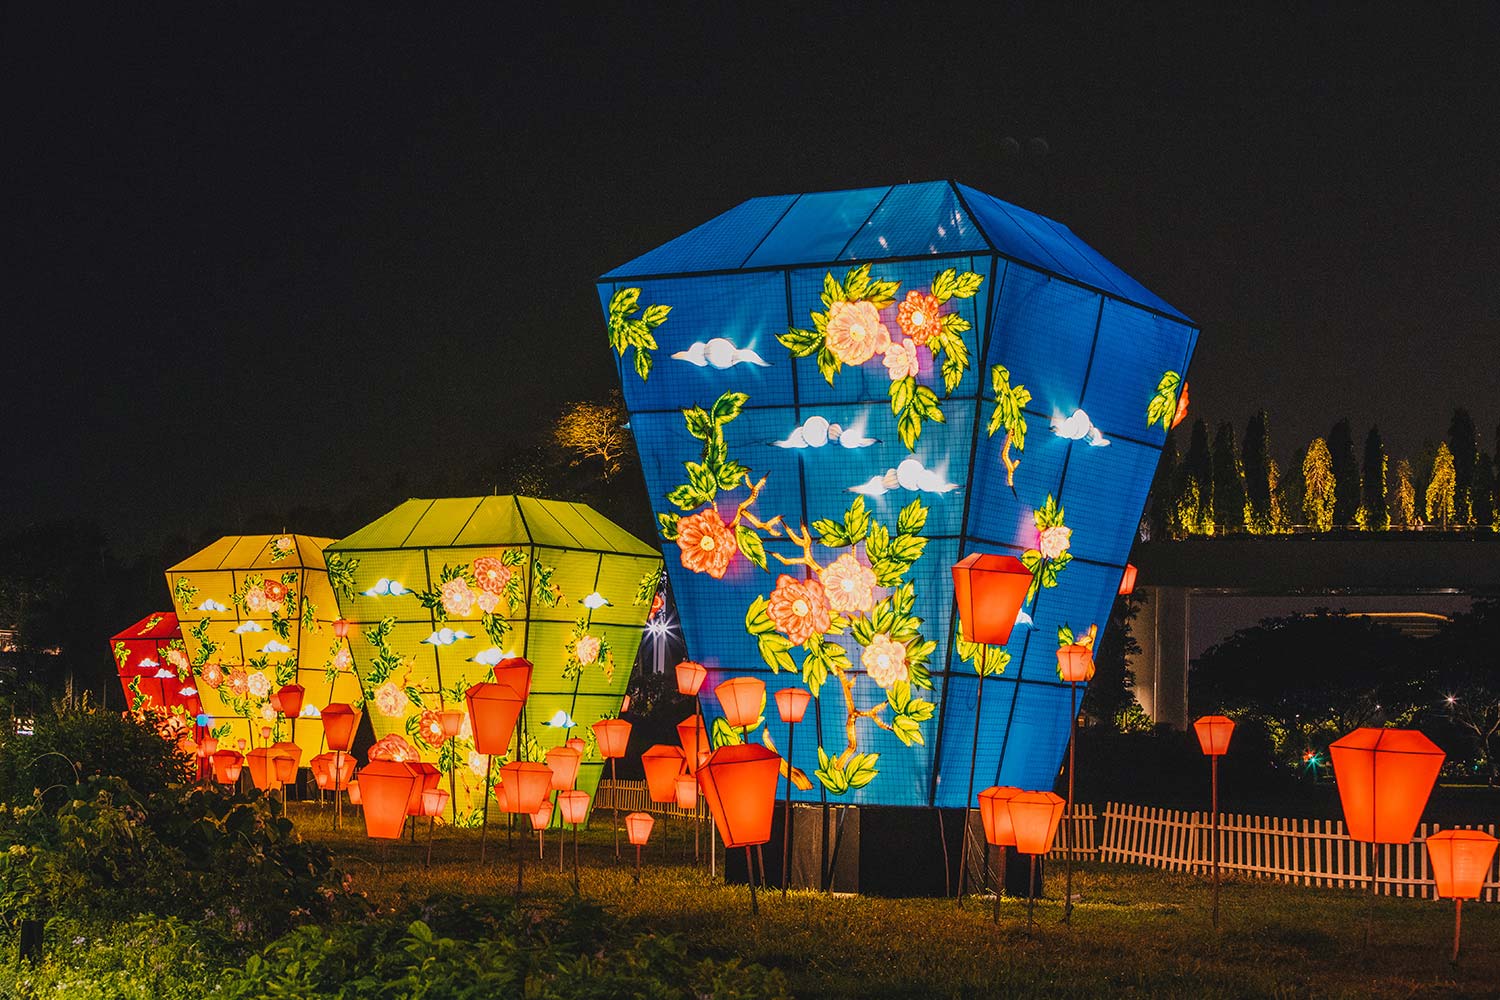 Celebrate Mid-Autumn Festival at Gardens by the Bay with Larger-than-Life Lanterns!